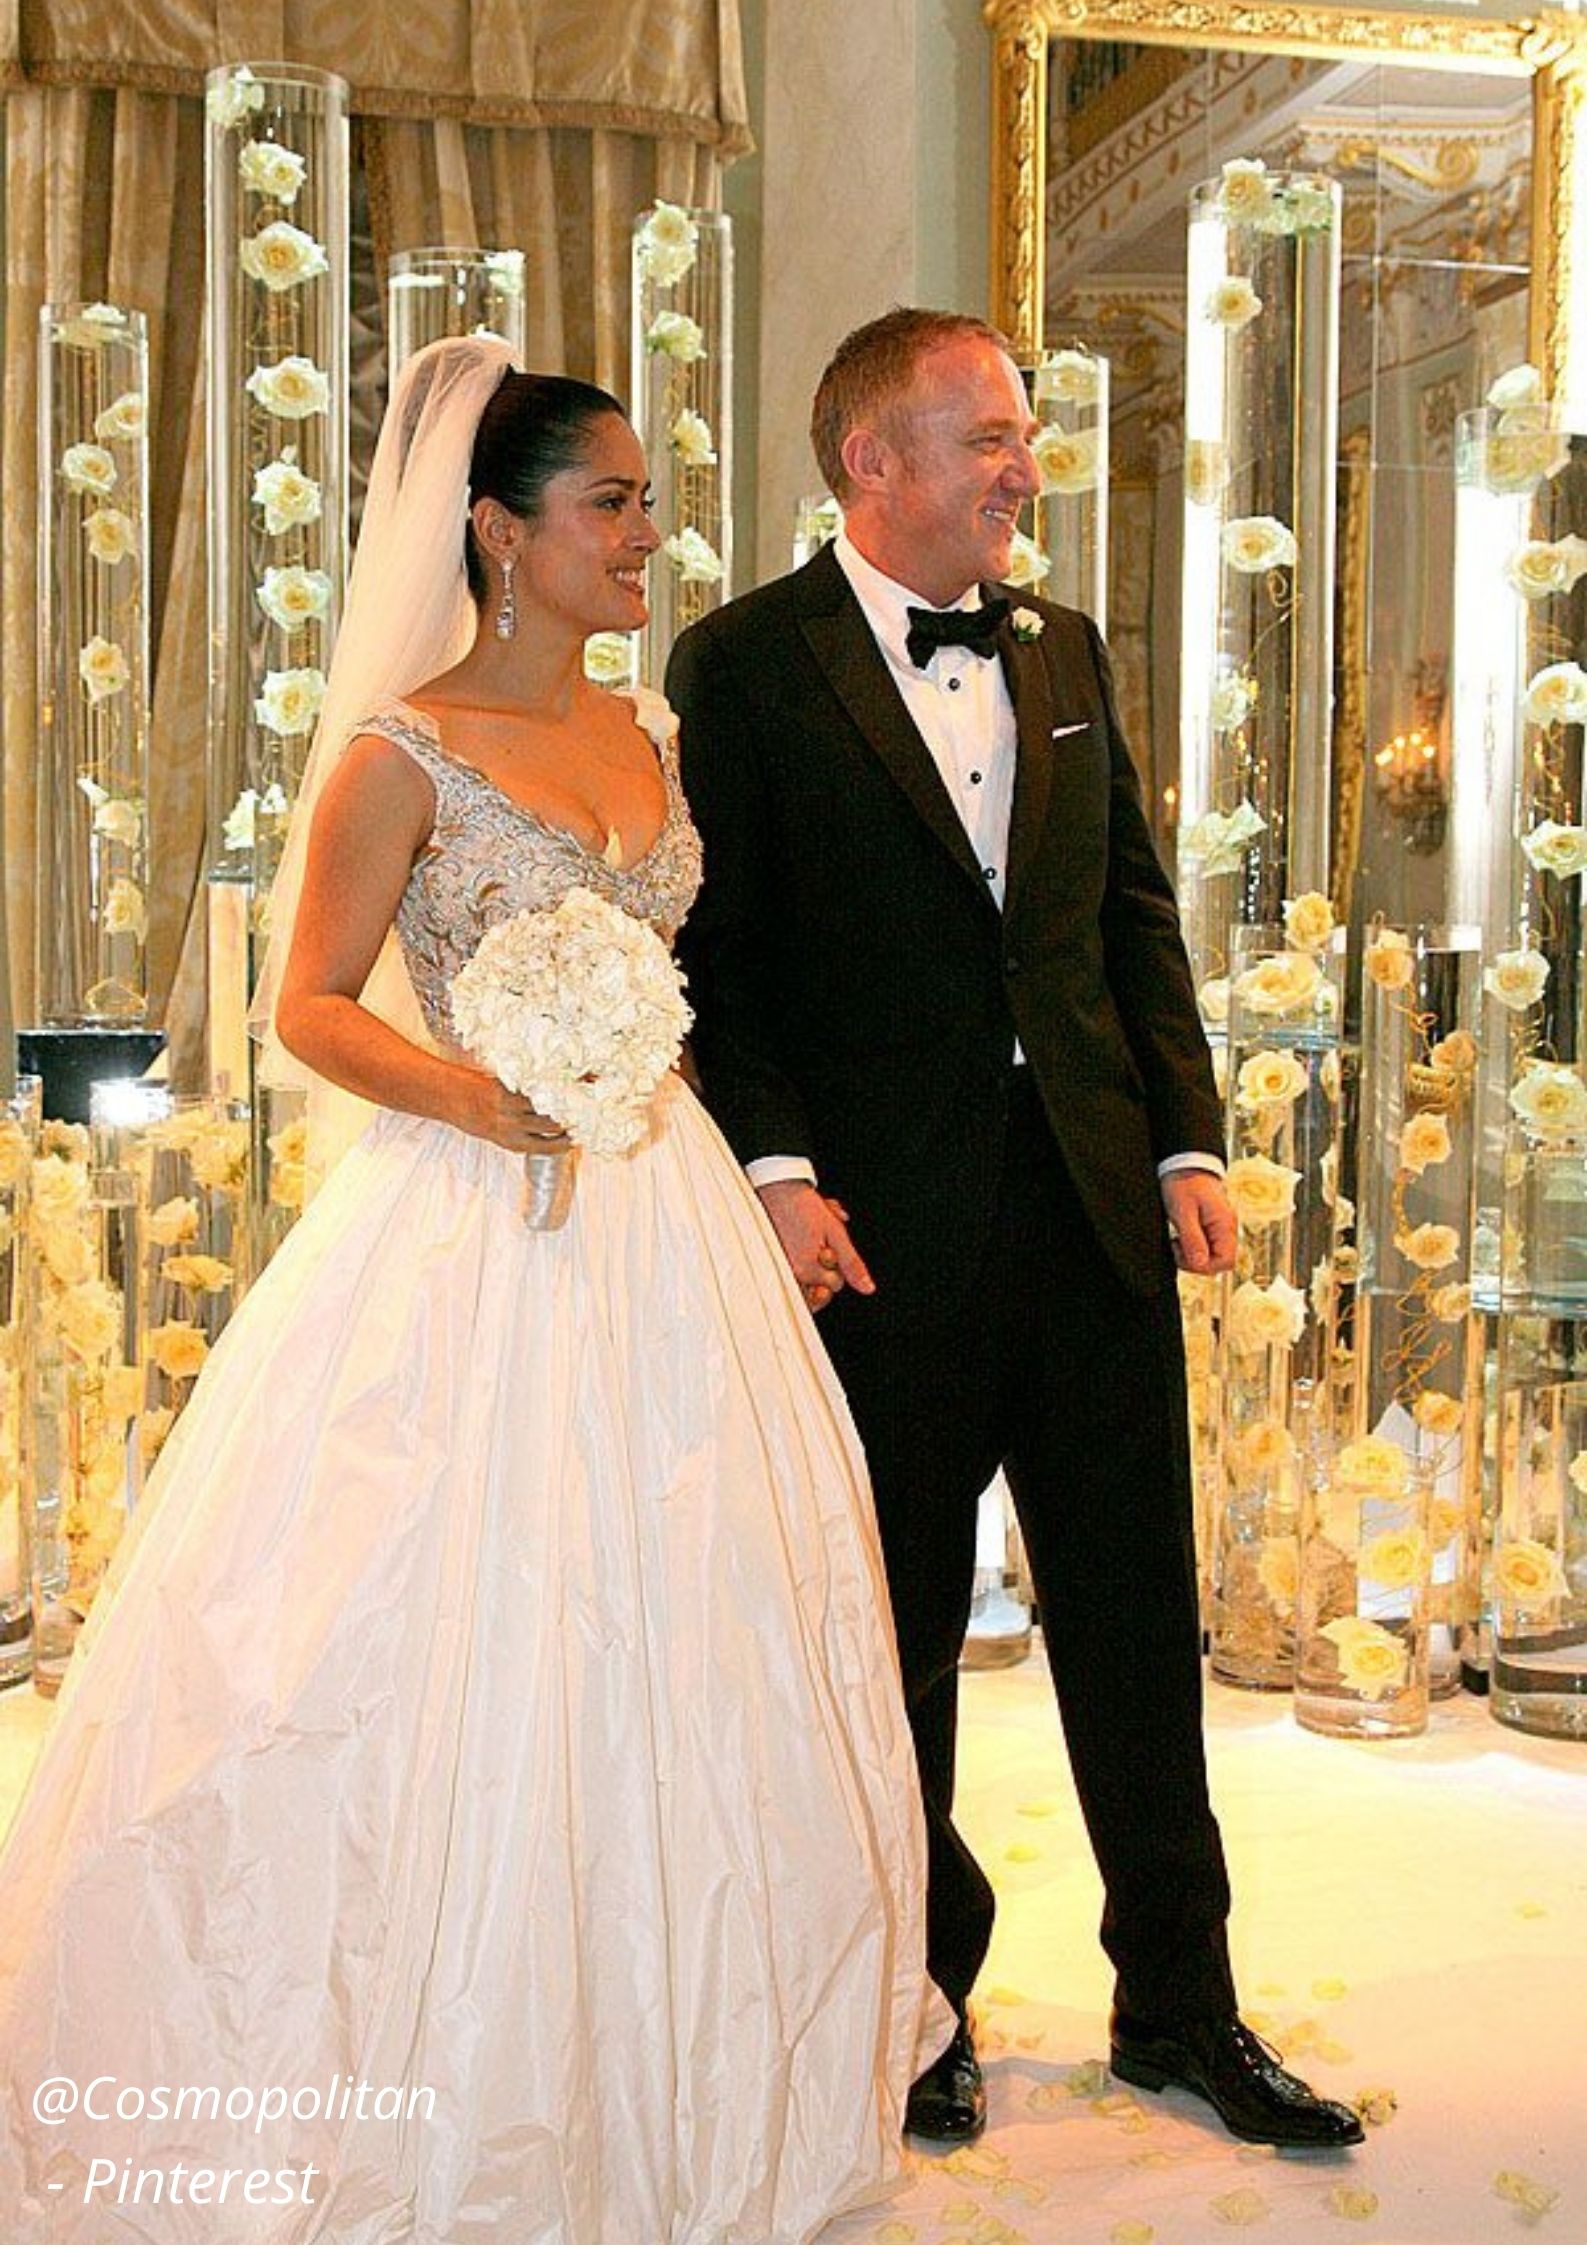 The Best Celebrity Wedding Reception Dresses Of All Time - Vogue